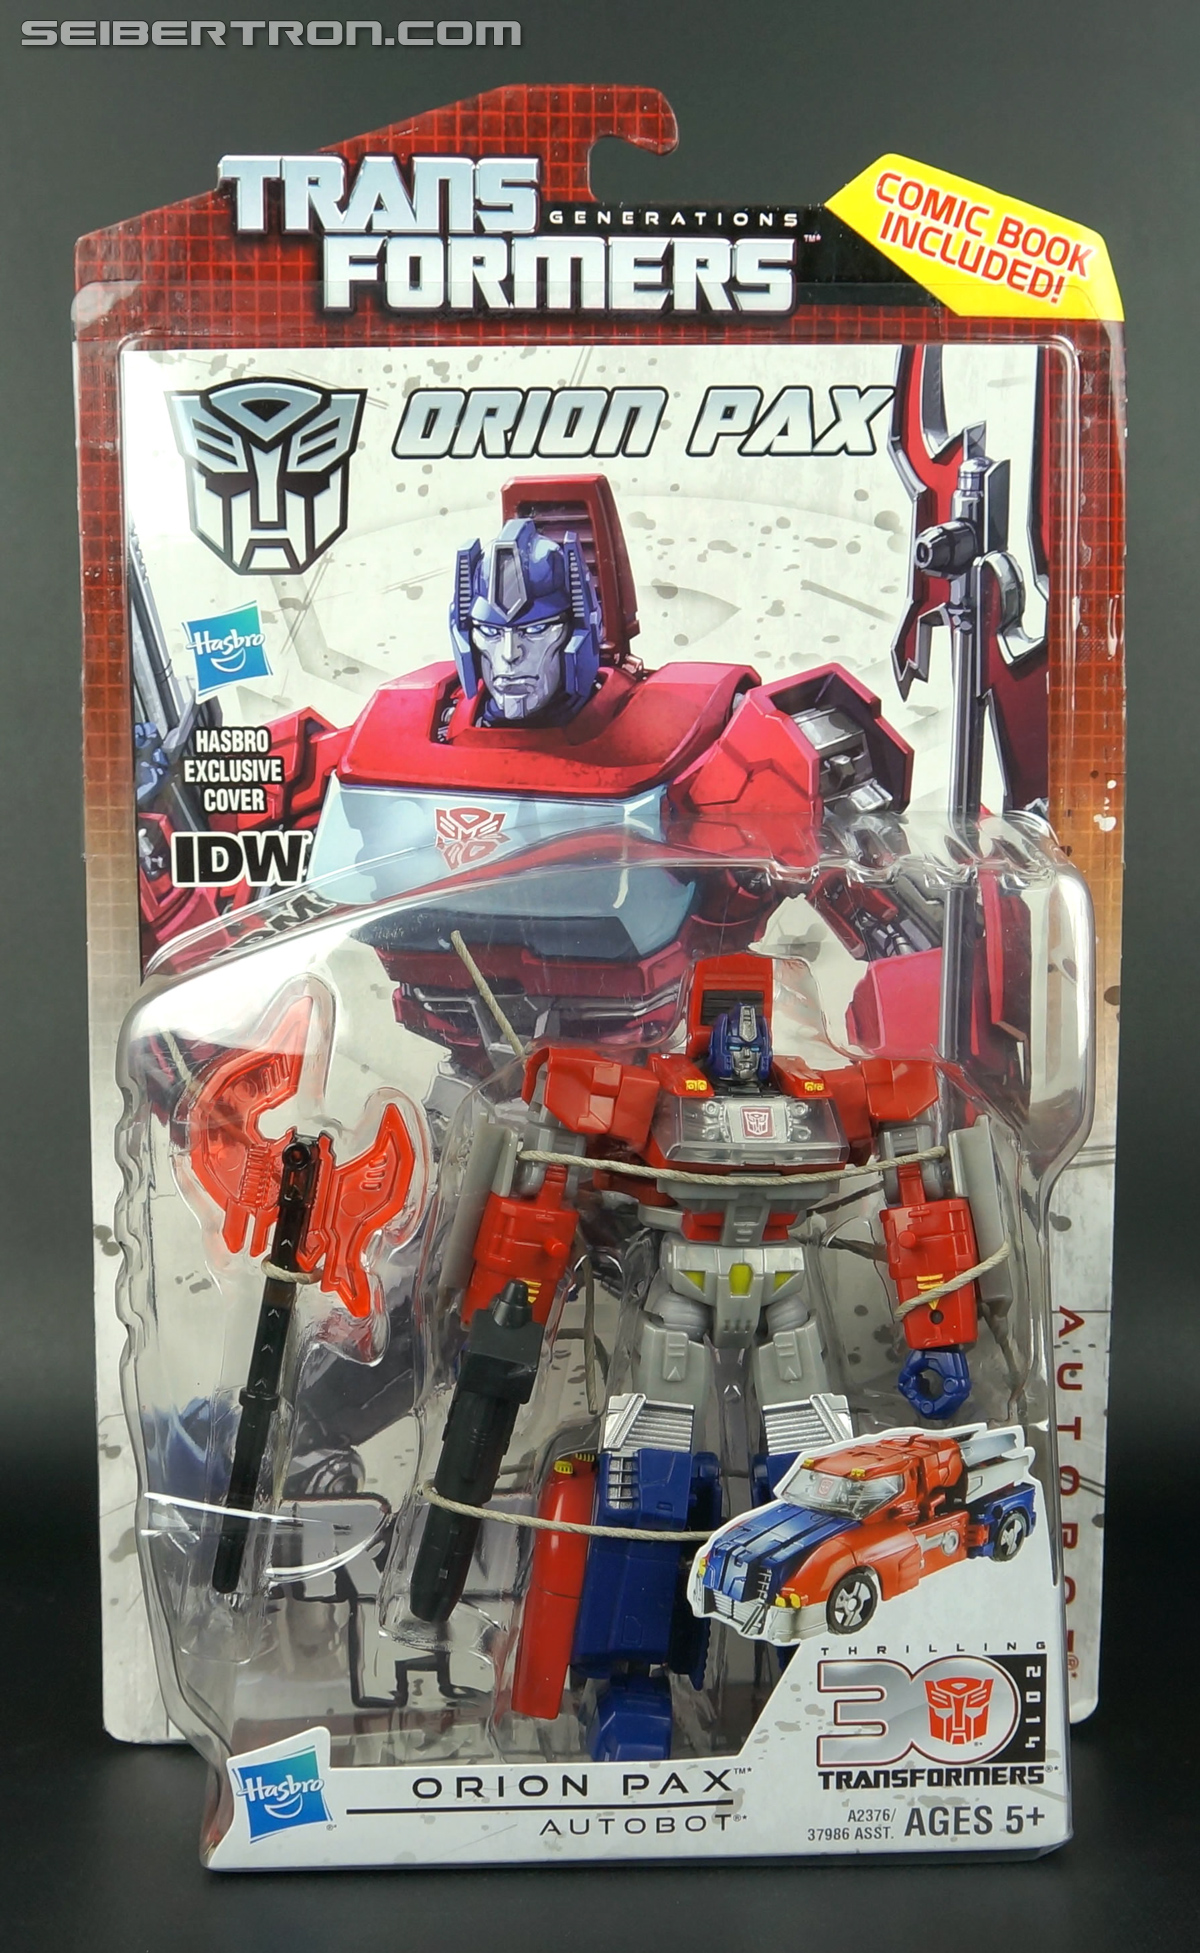 Transformers Generations Orion Pax (Optimus Prime) Toy Gallery (Image #1 of  174)